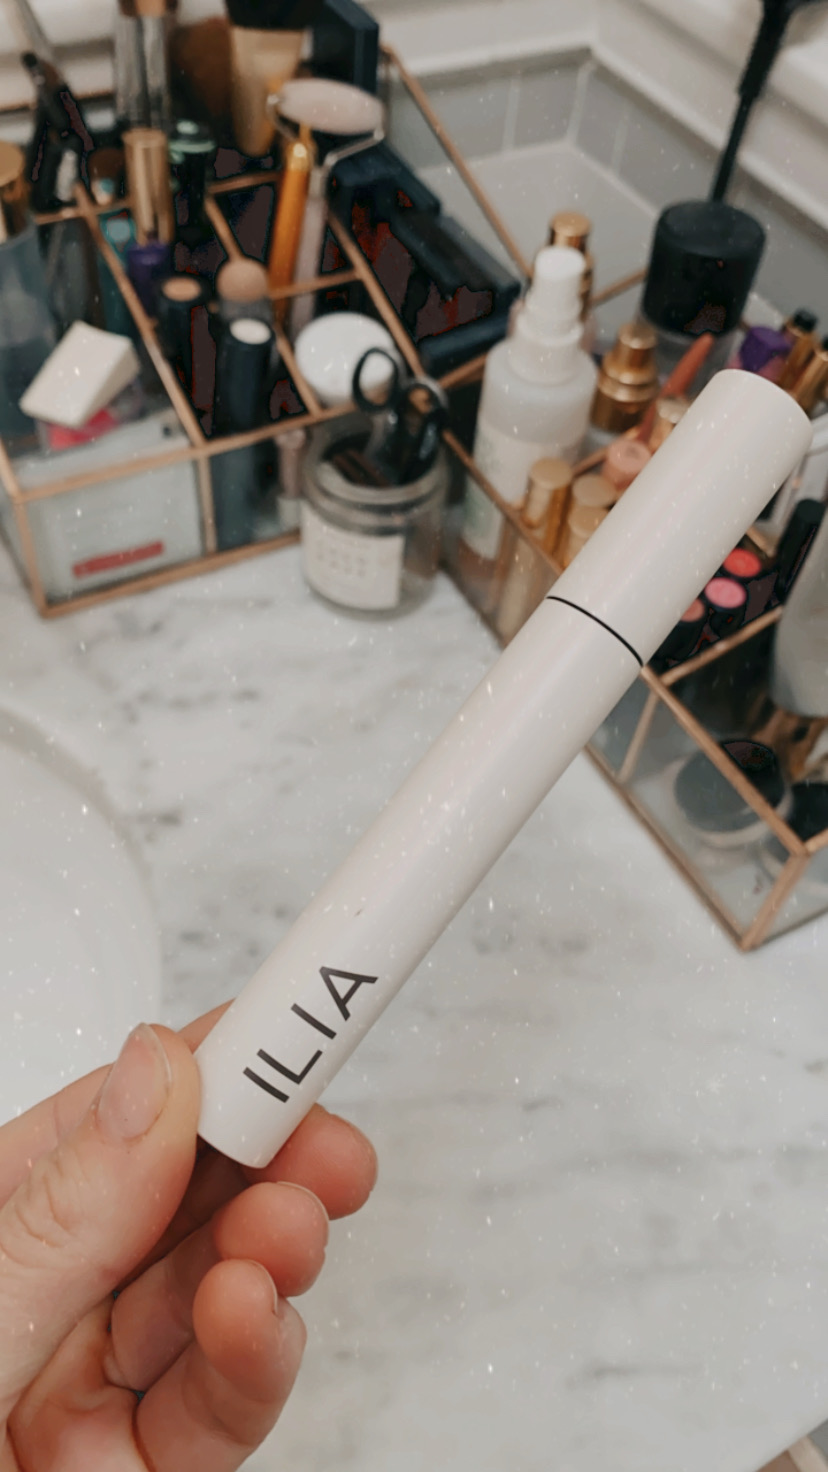 Ilia mascara review, recent beauty purchases